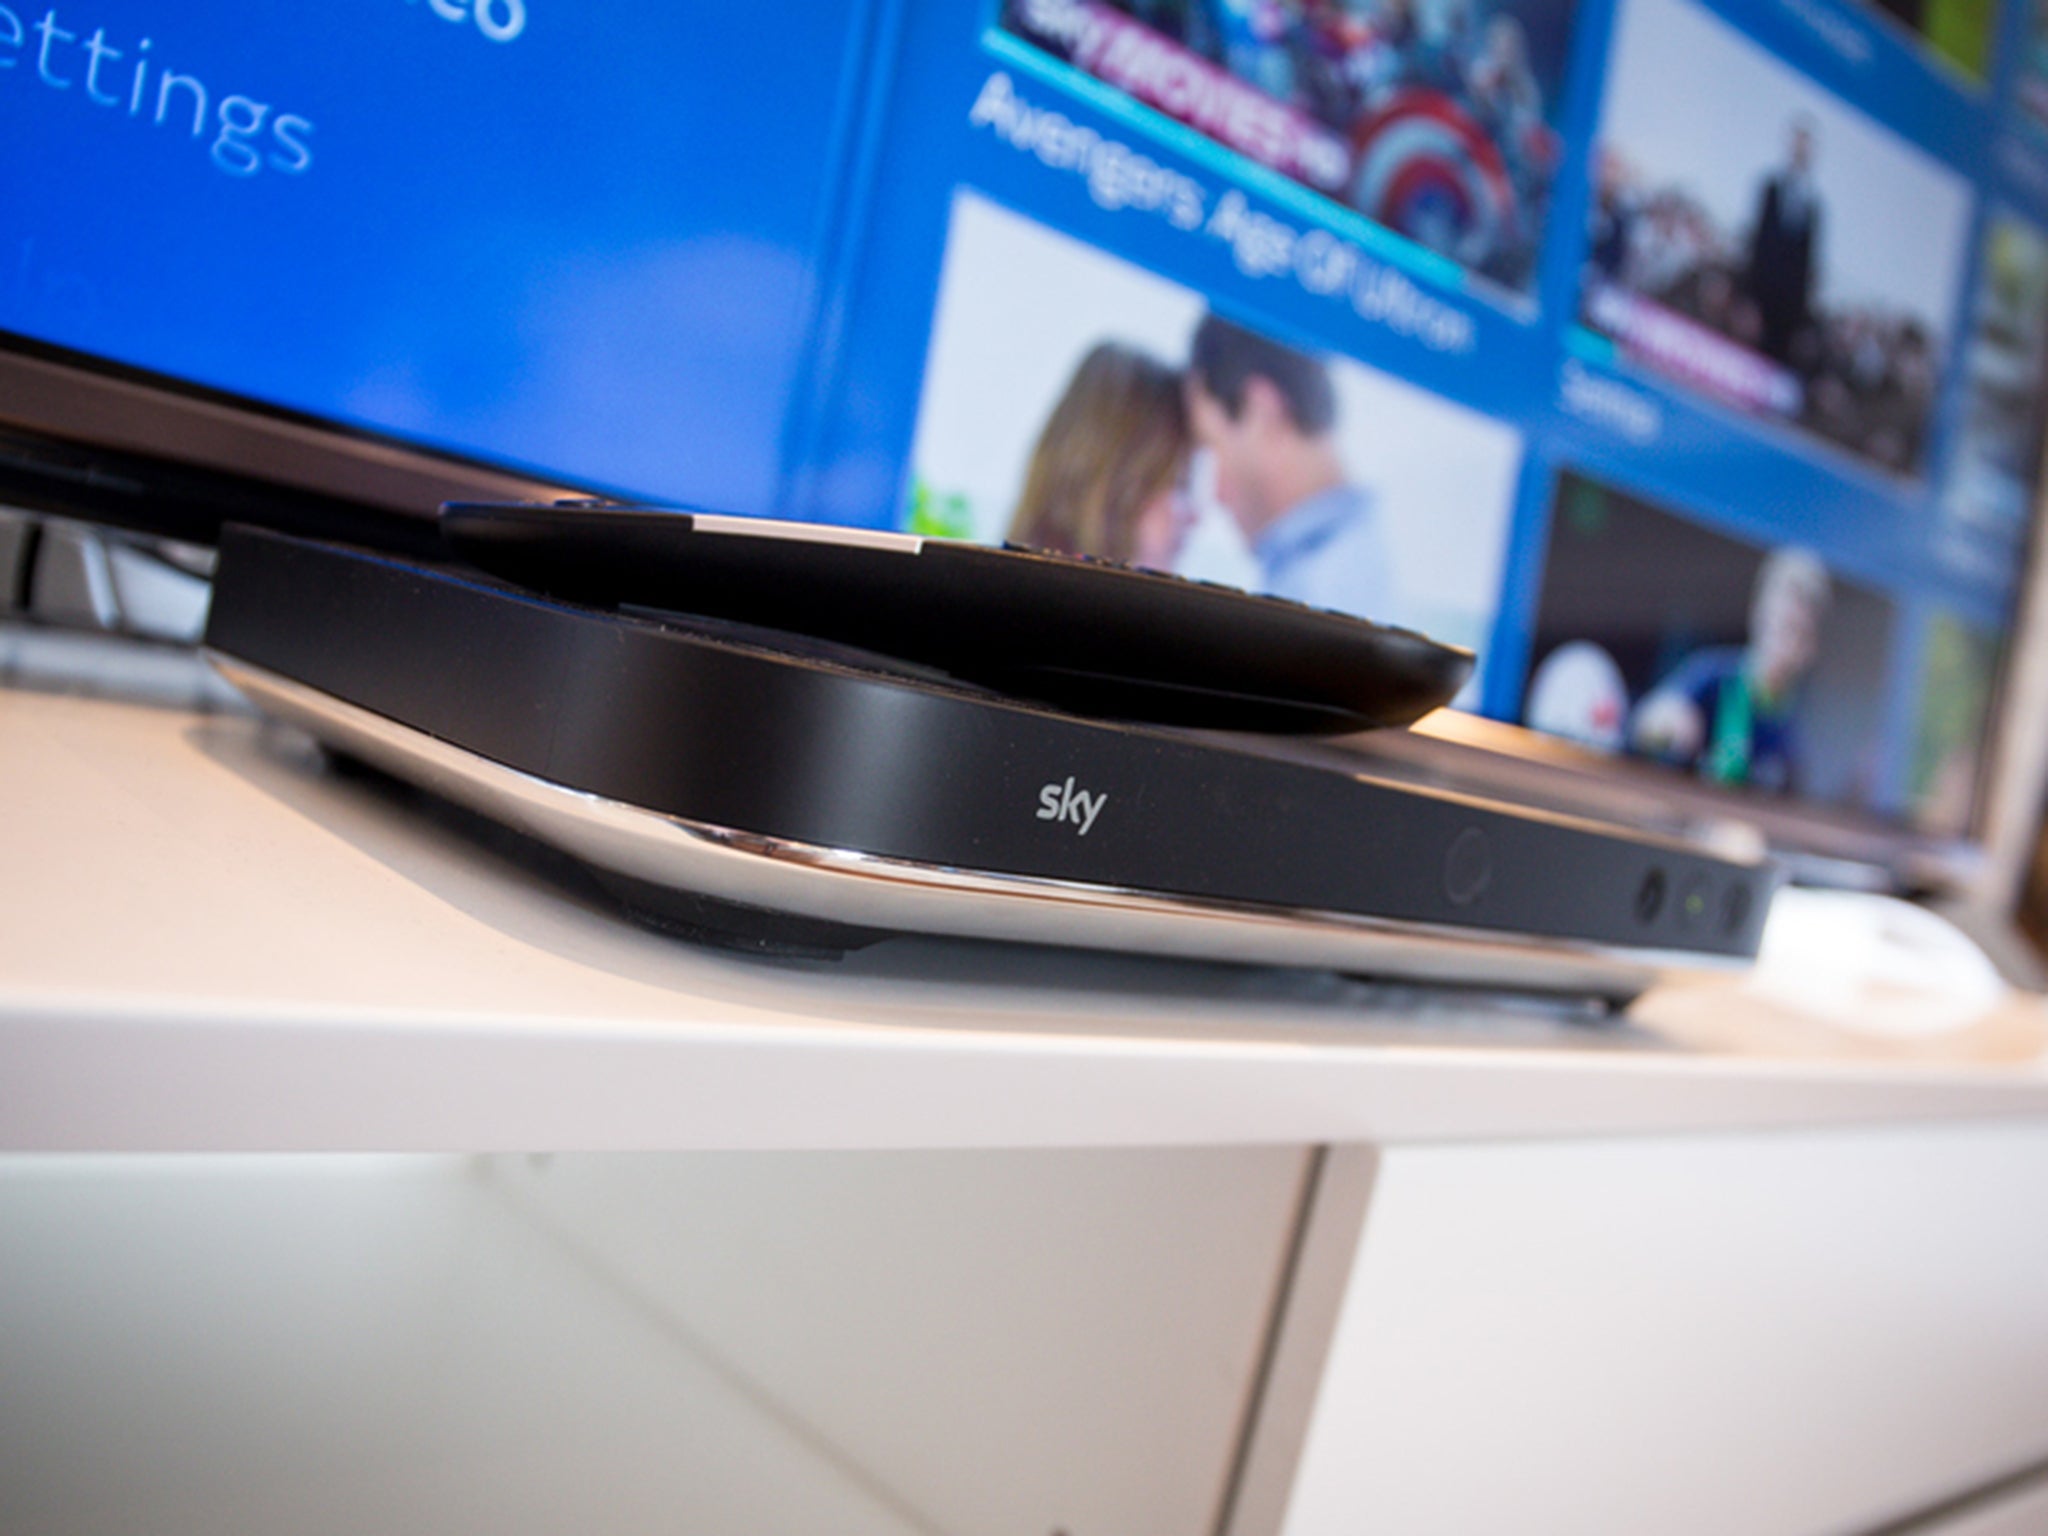 Sky Q has been out for years, but is still receiving major feature updates